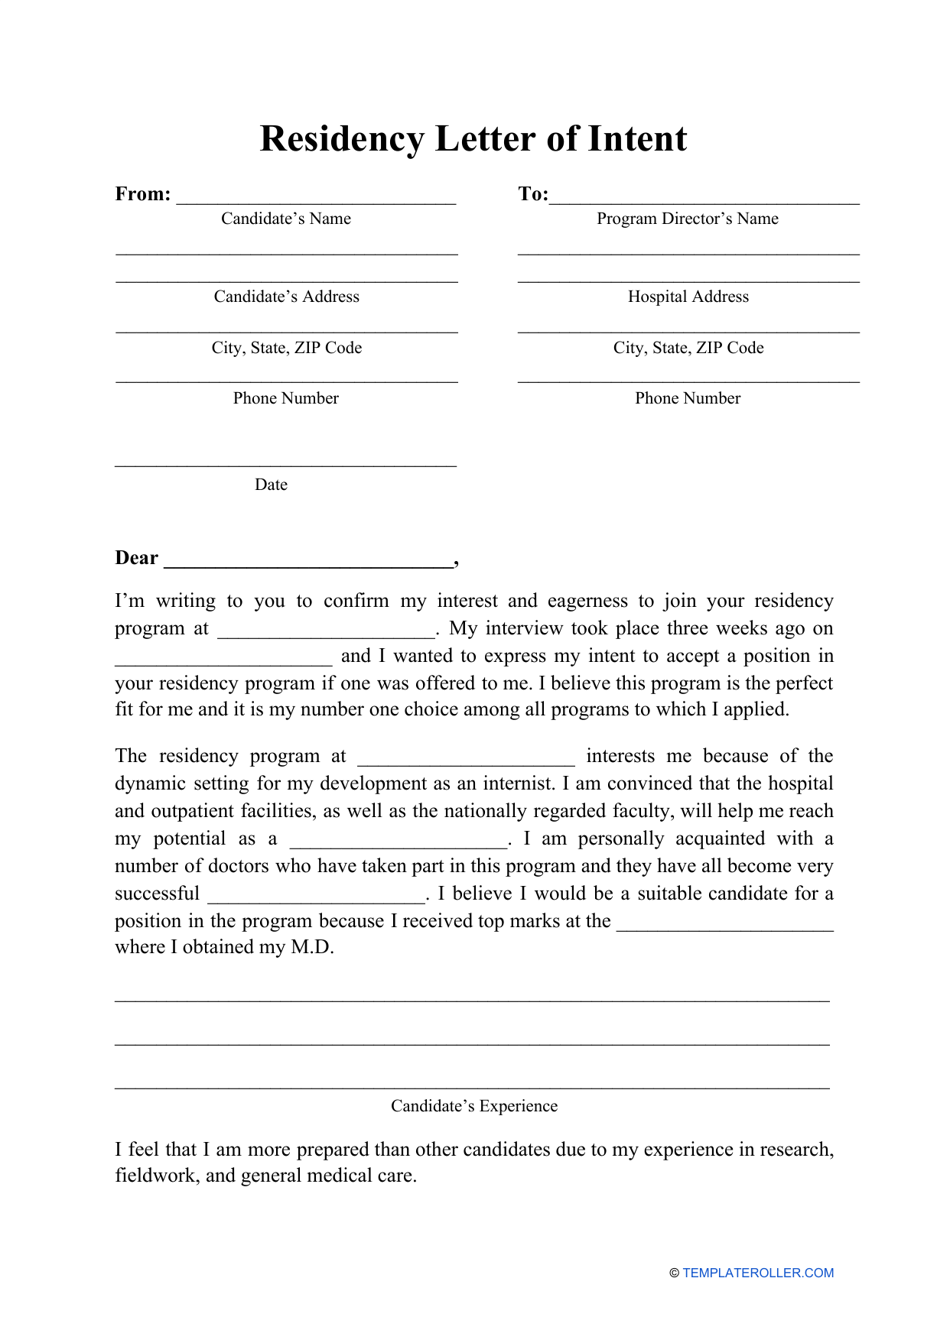 Residency Letter of Intent Template Download Printable PDF